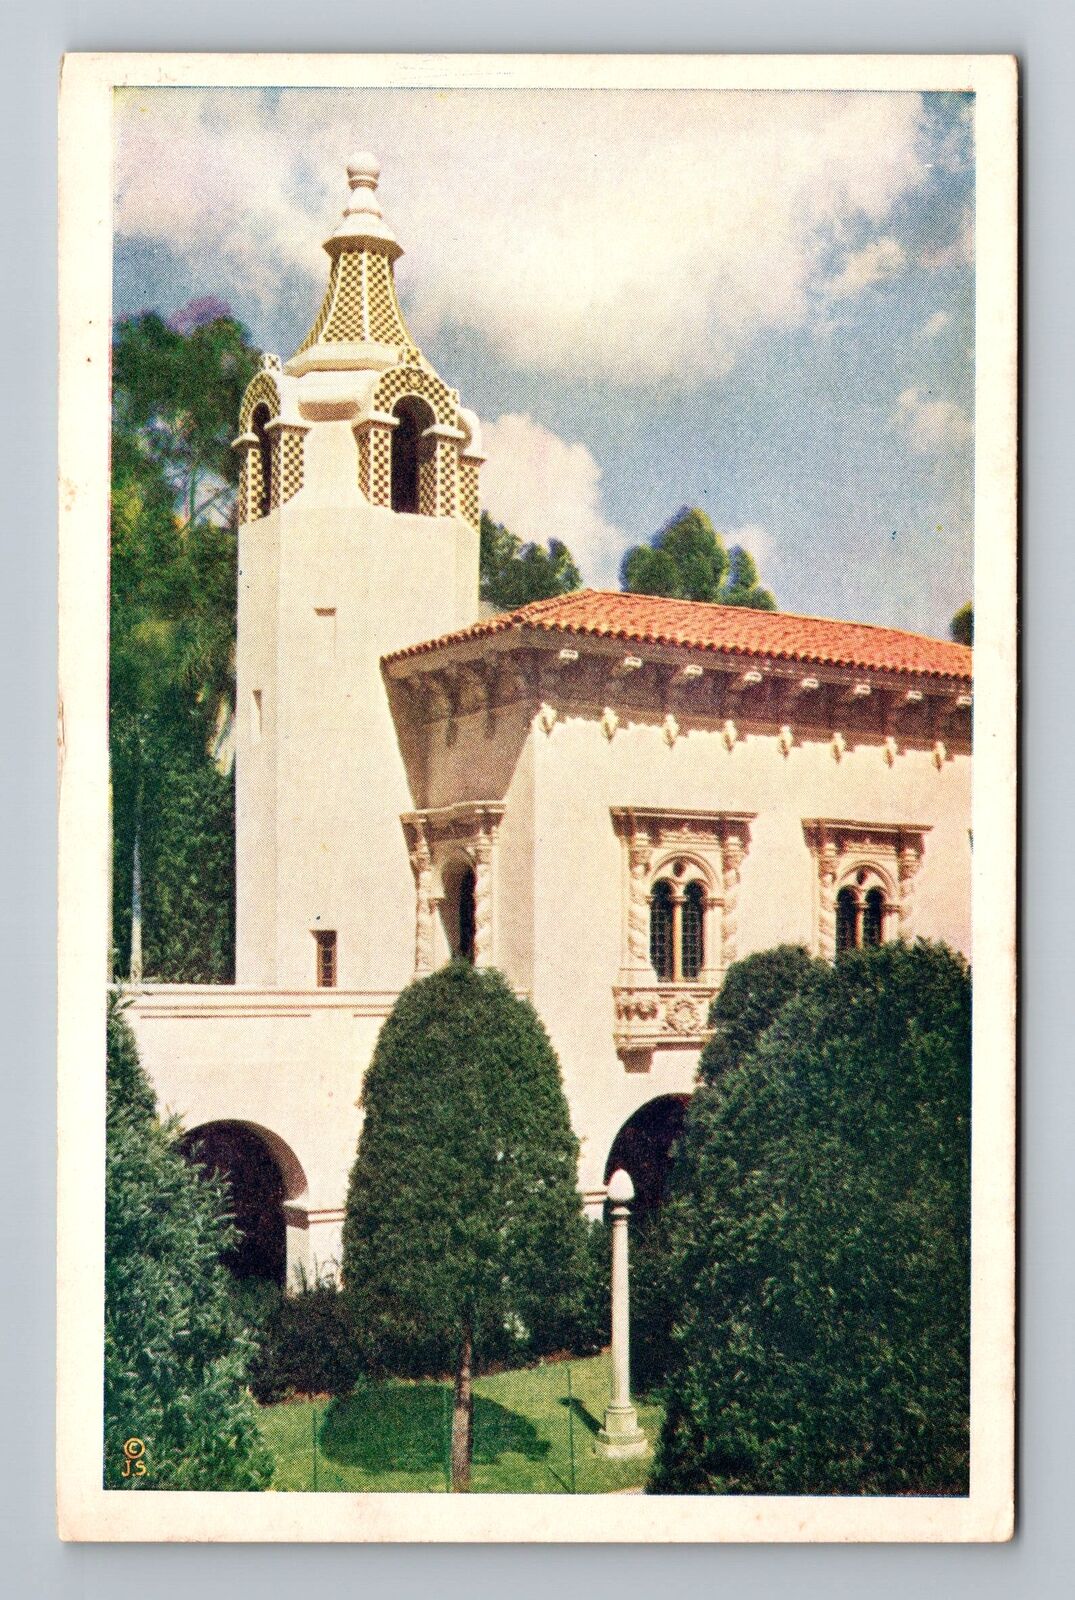 CA-California, The Palace Photography, Scenic Outside, Vintage Postcard